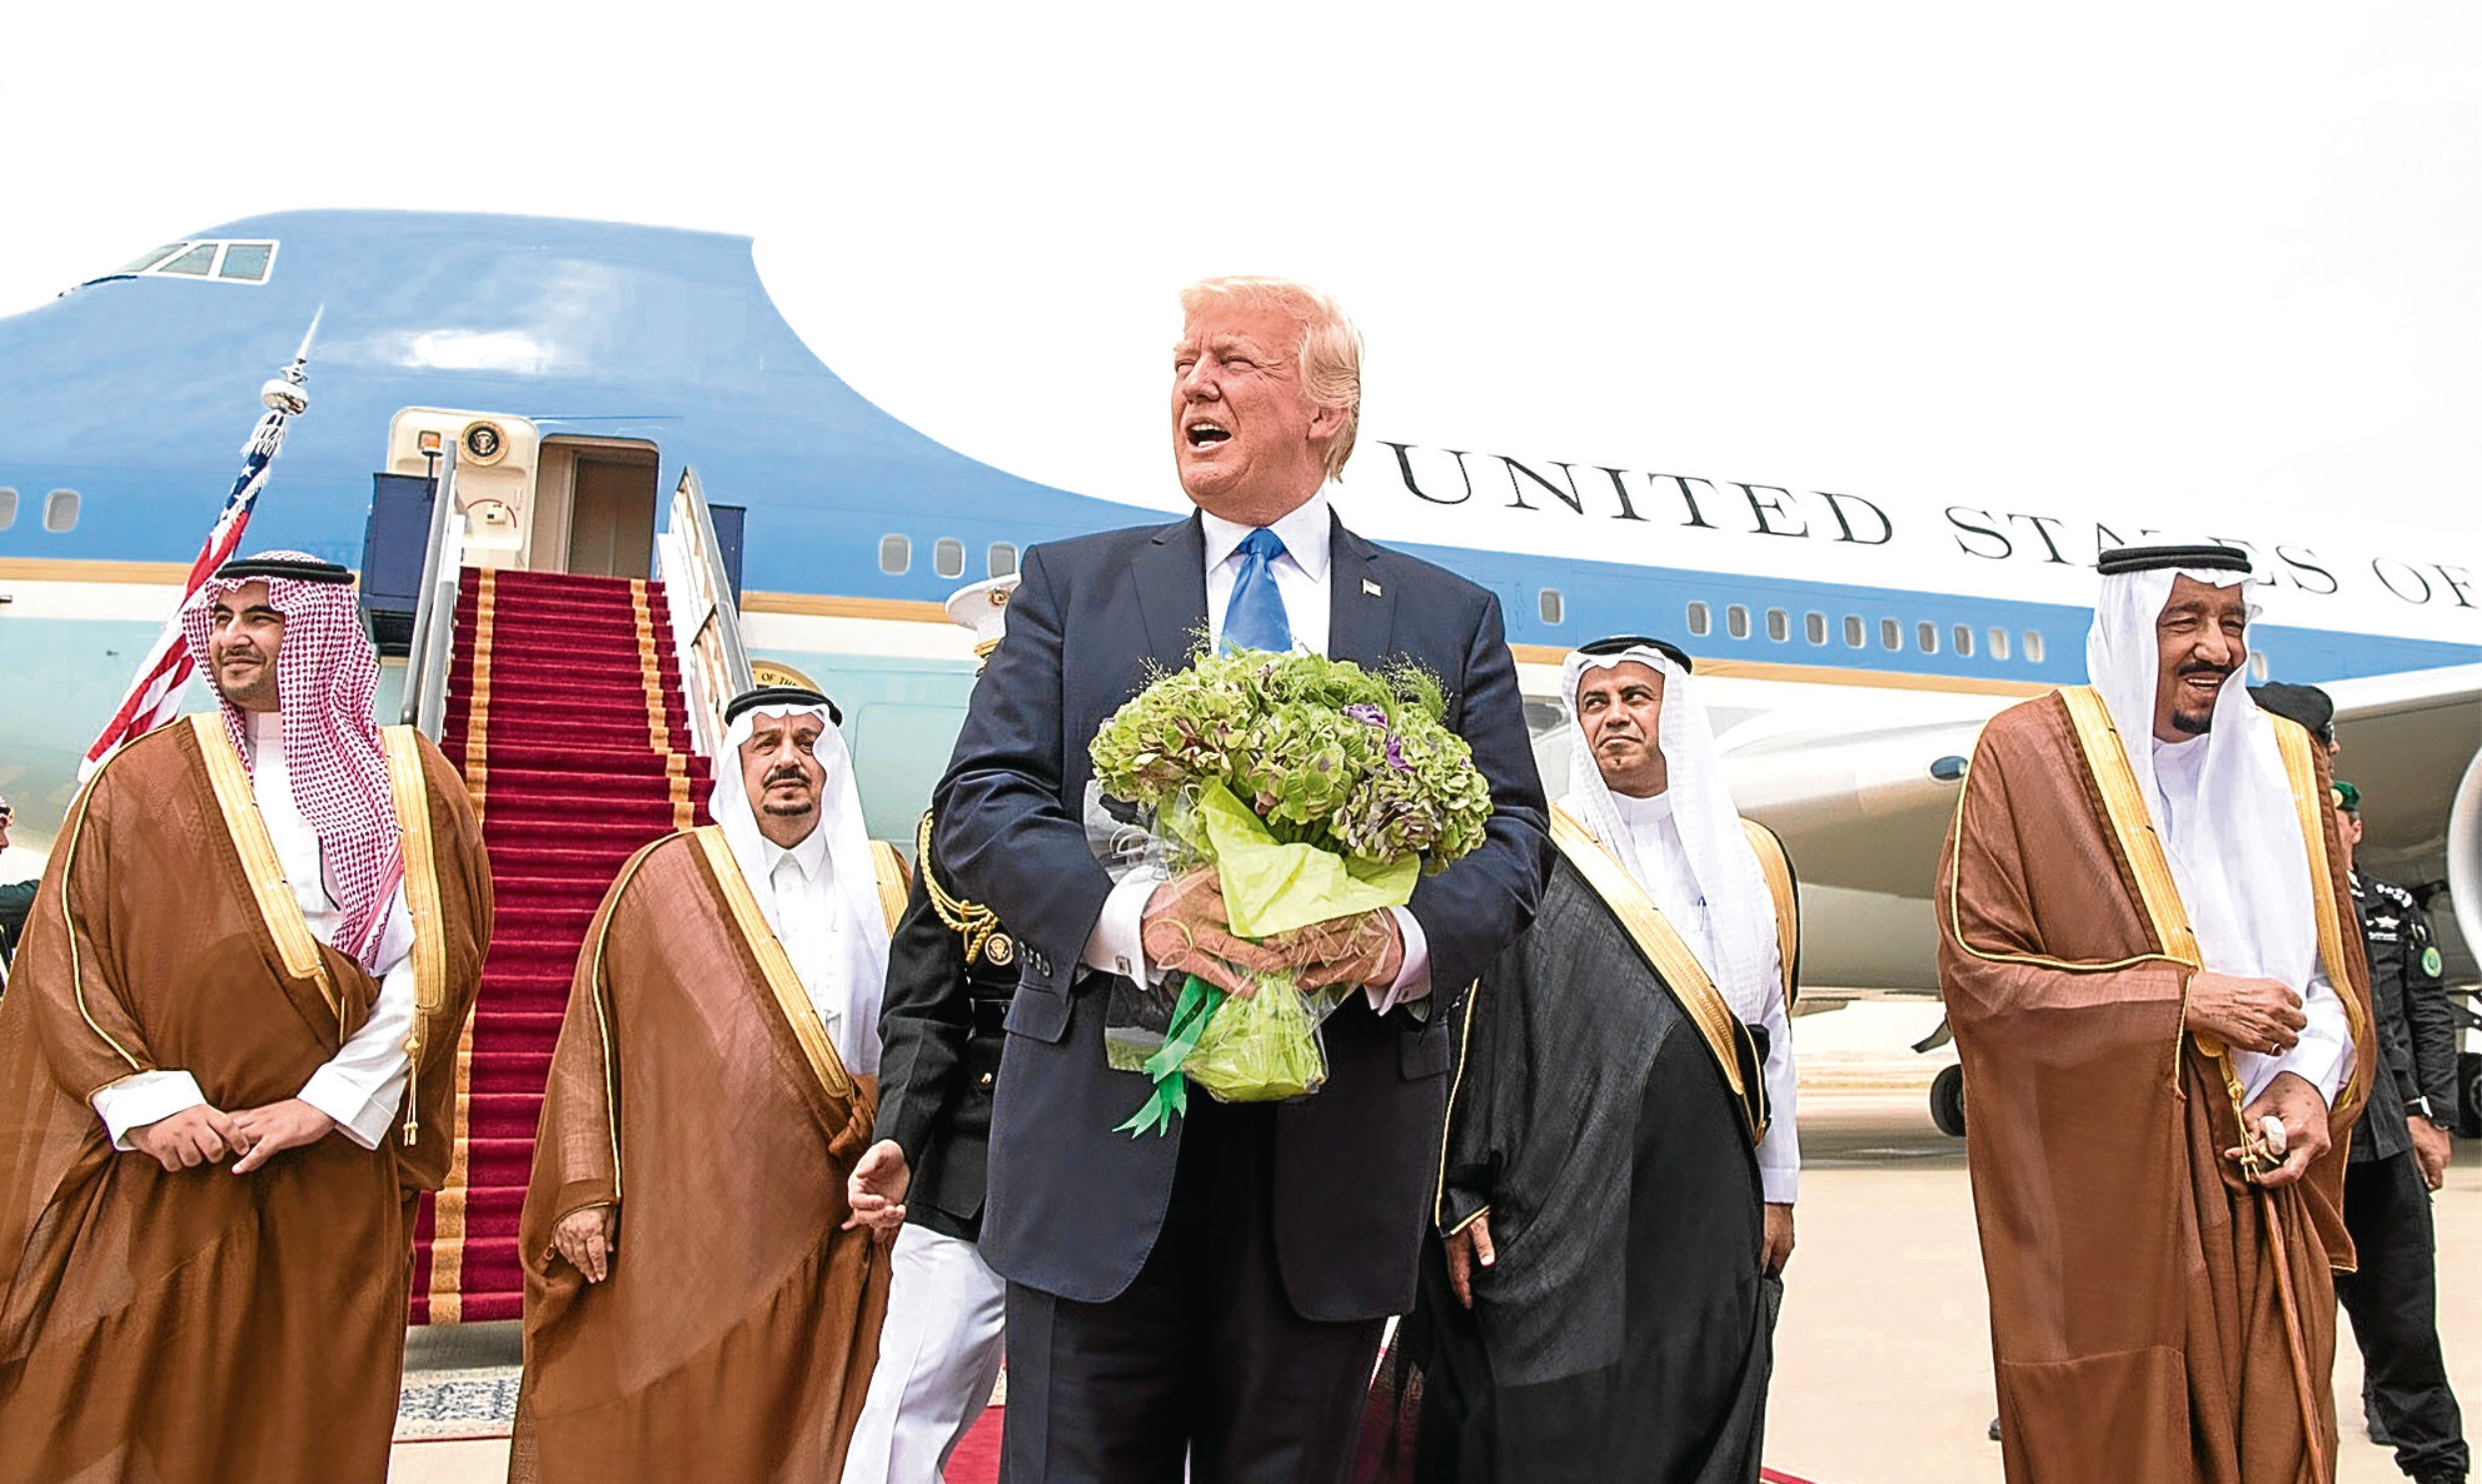 Donald Trump is welcomed to Saudi Arabia by members of the Saudi royal family